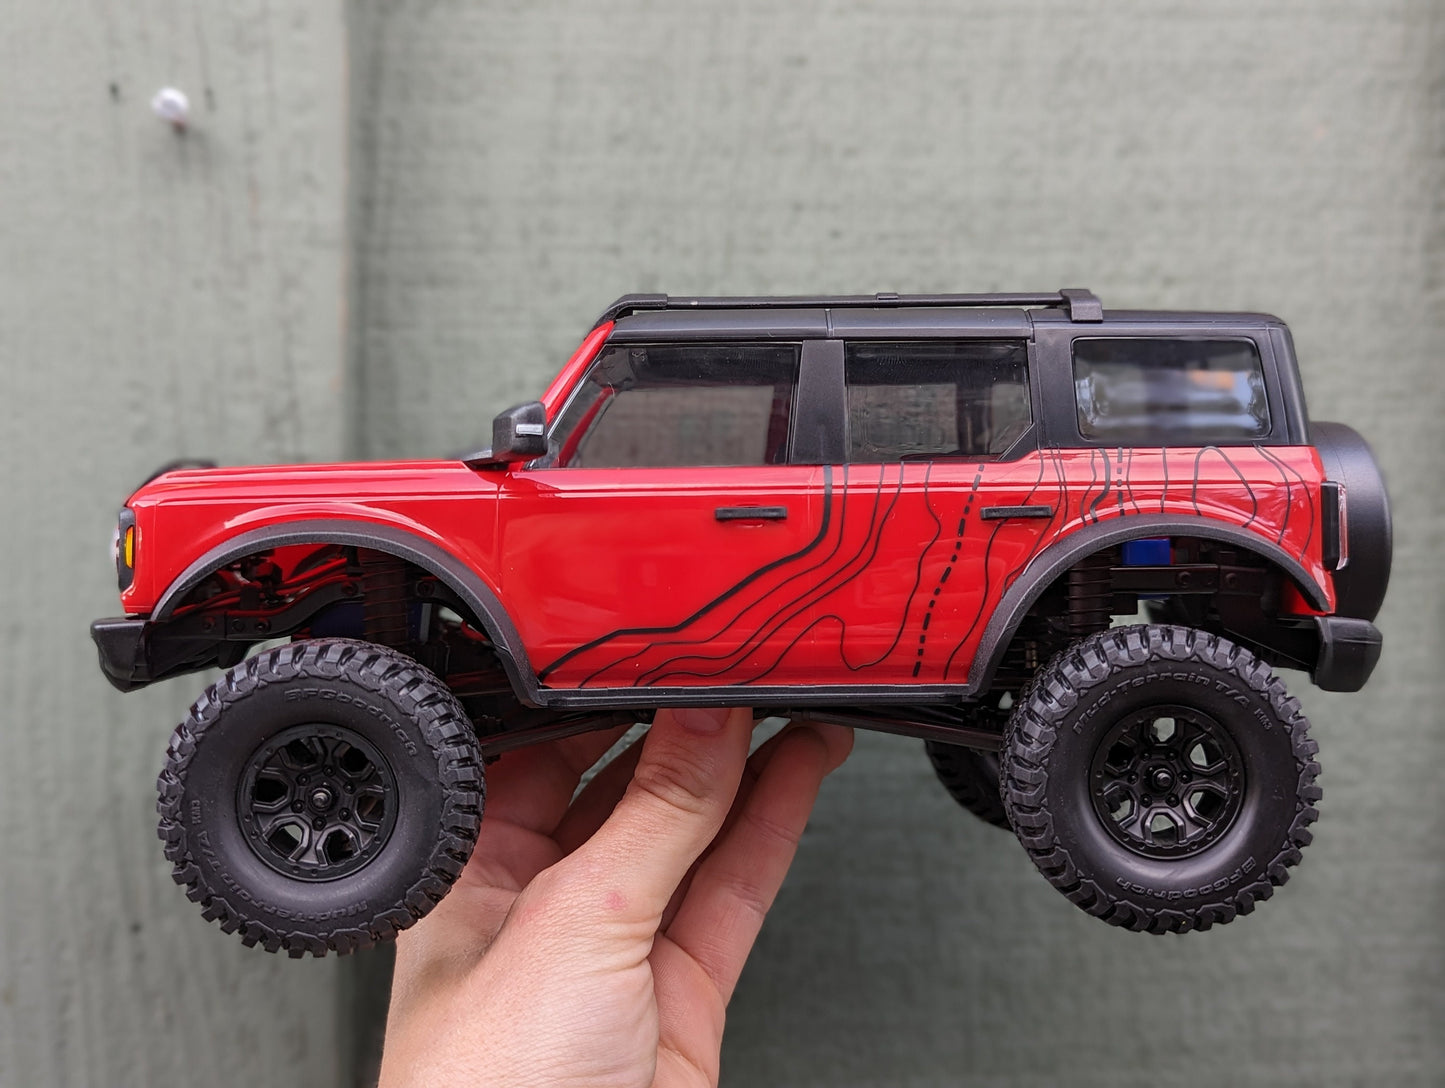 Topography Graphics for the TRX-4M Bronco, by The RC Girl